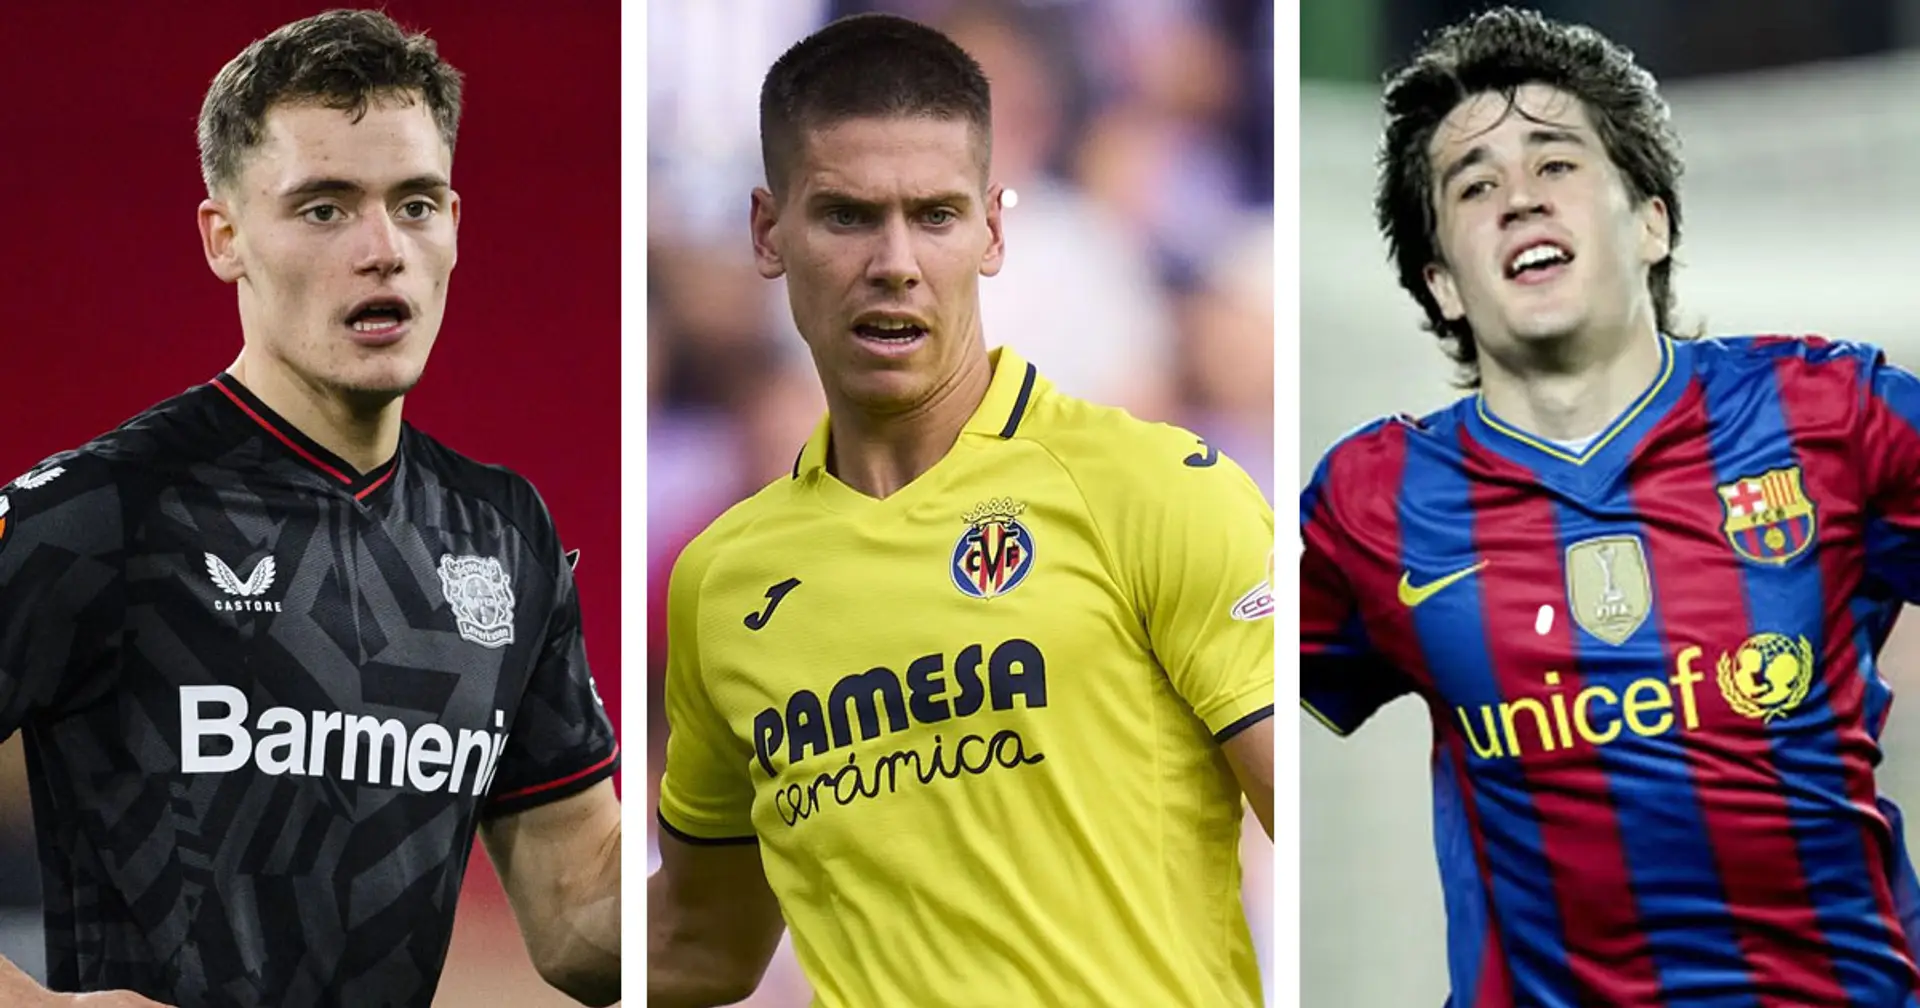 Foyth moving futher away from Barca and 3 more under-radar stories today